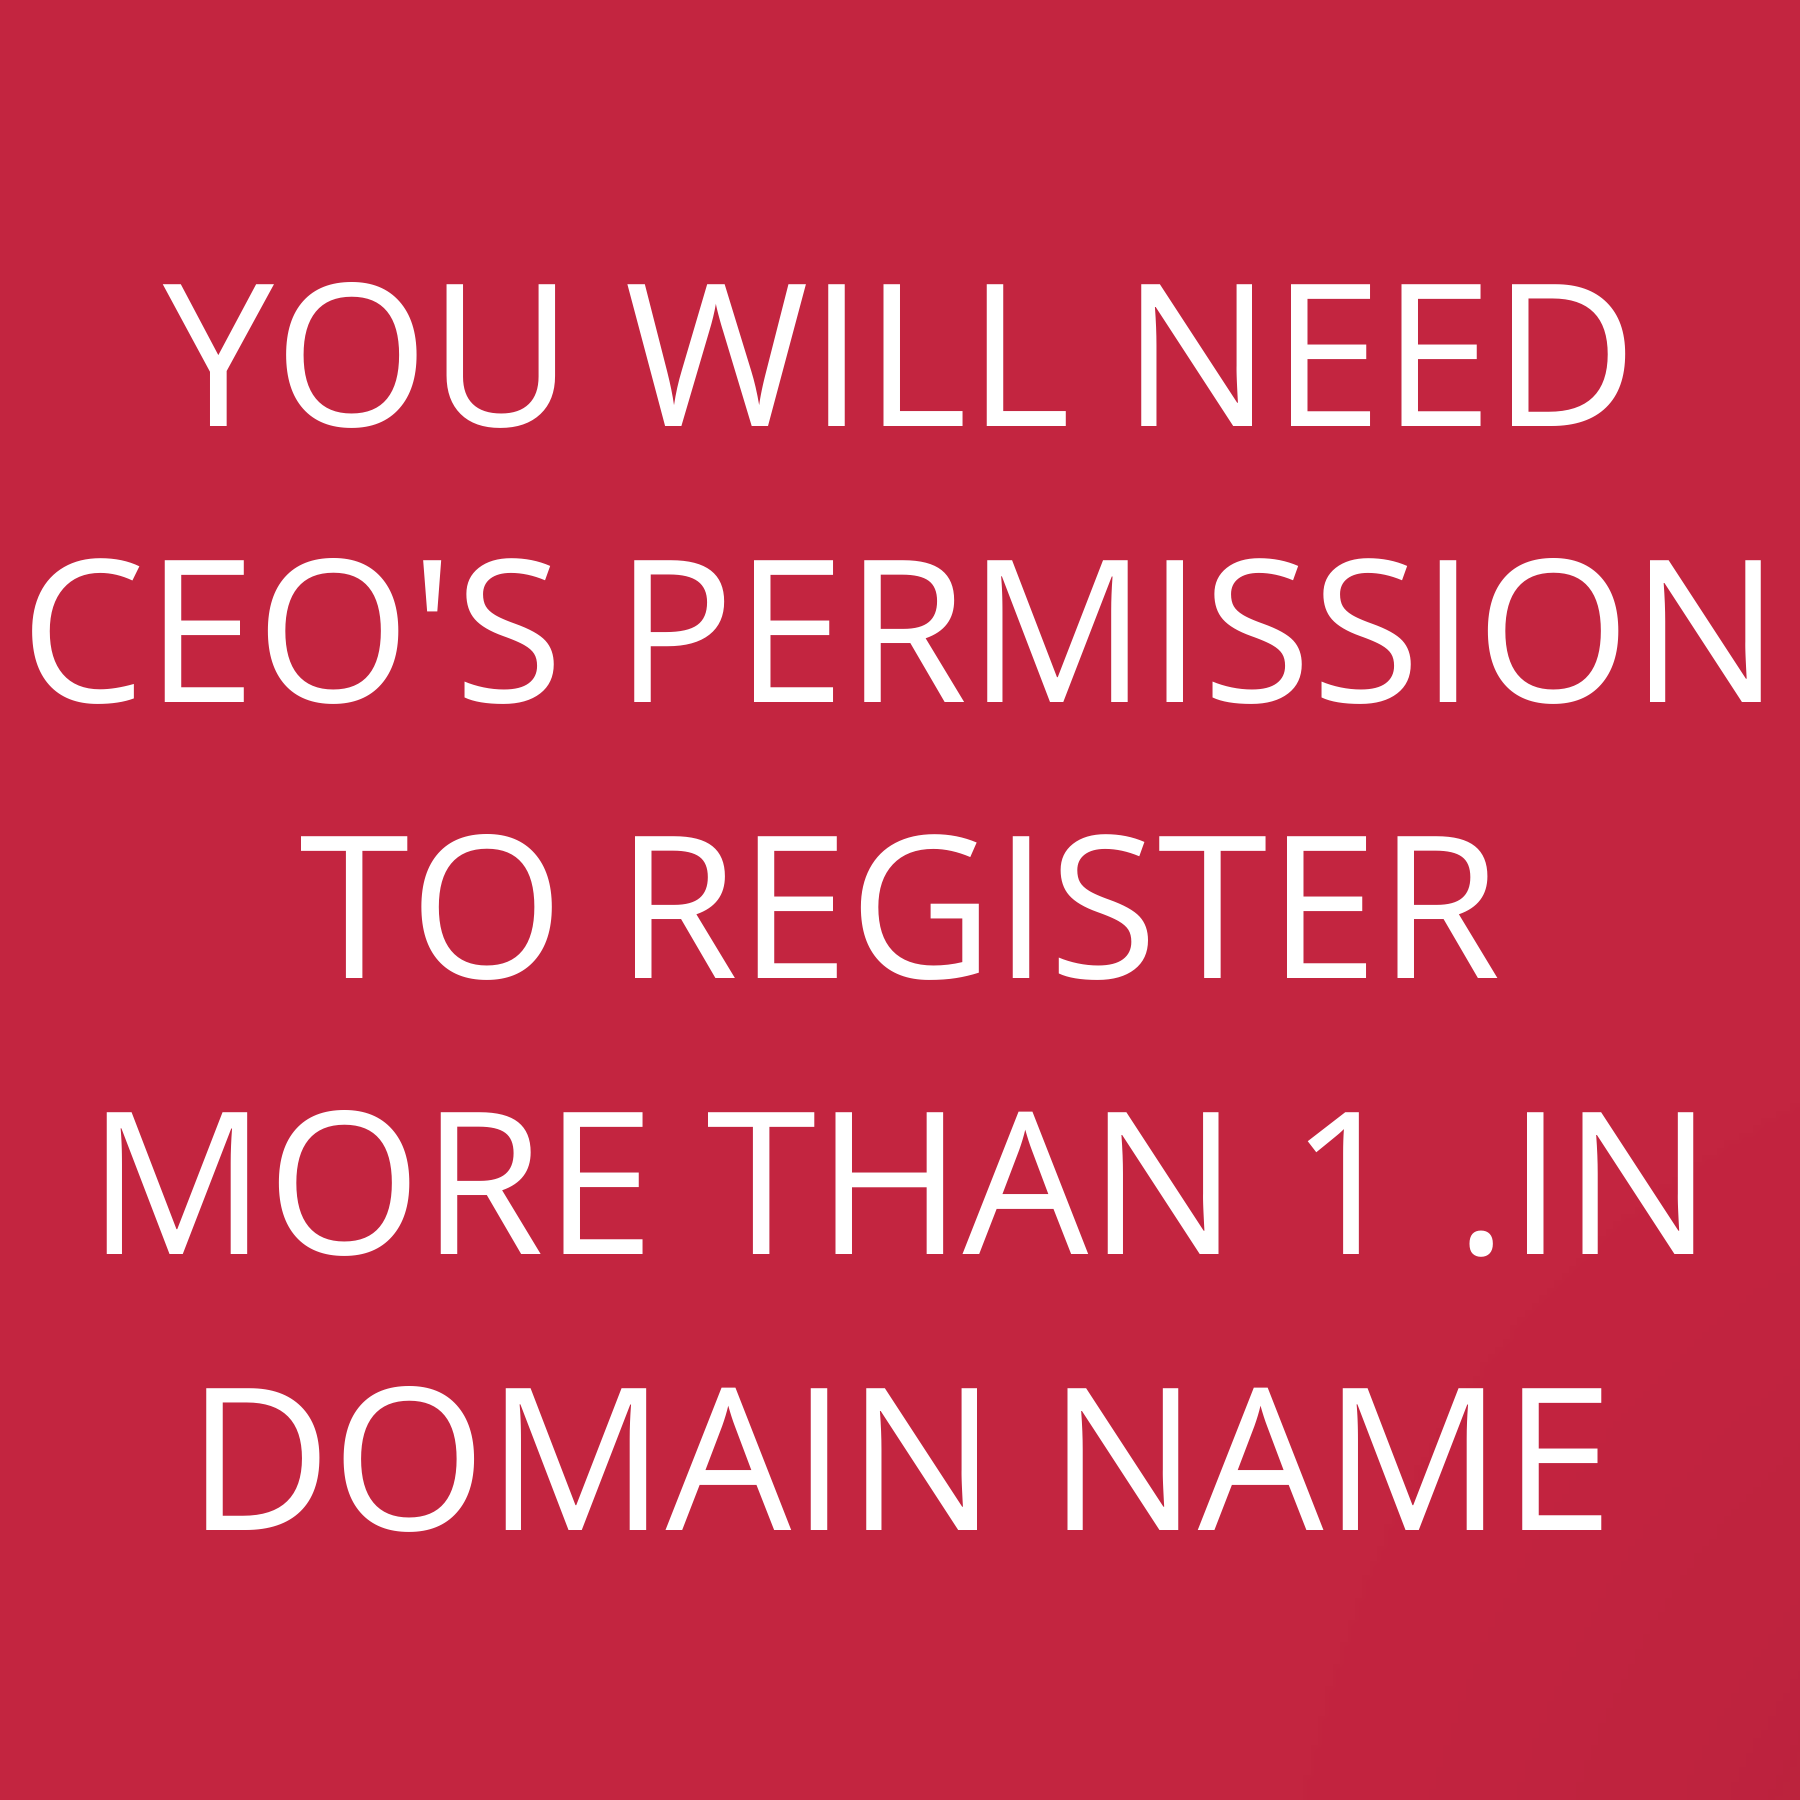 You will need CEO’s permission to register more than 1 .in domain name